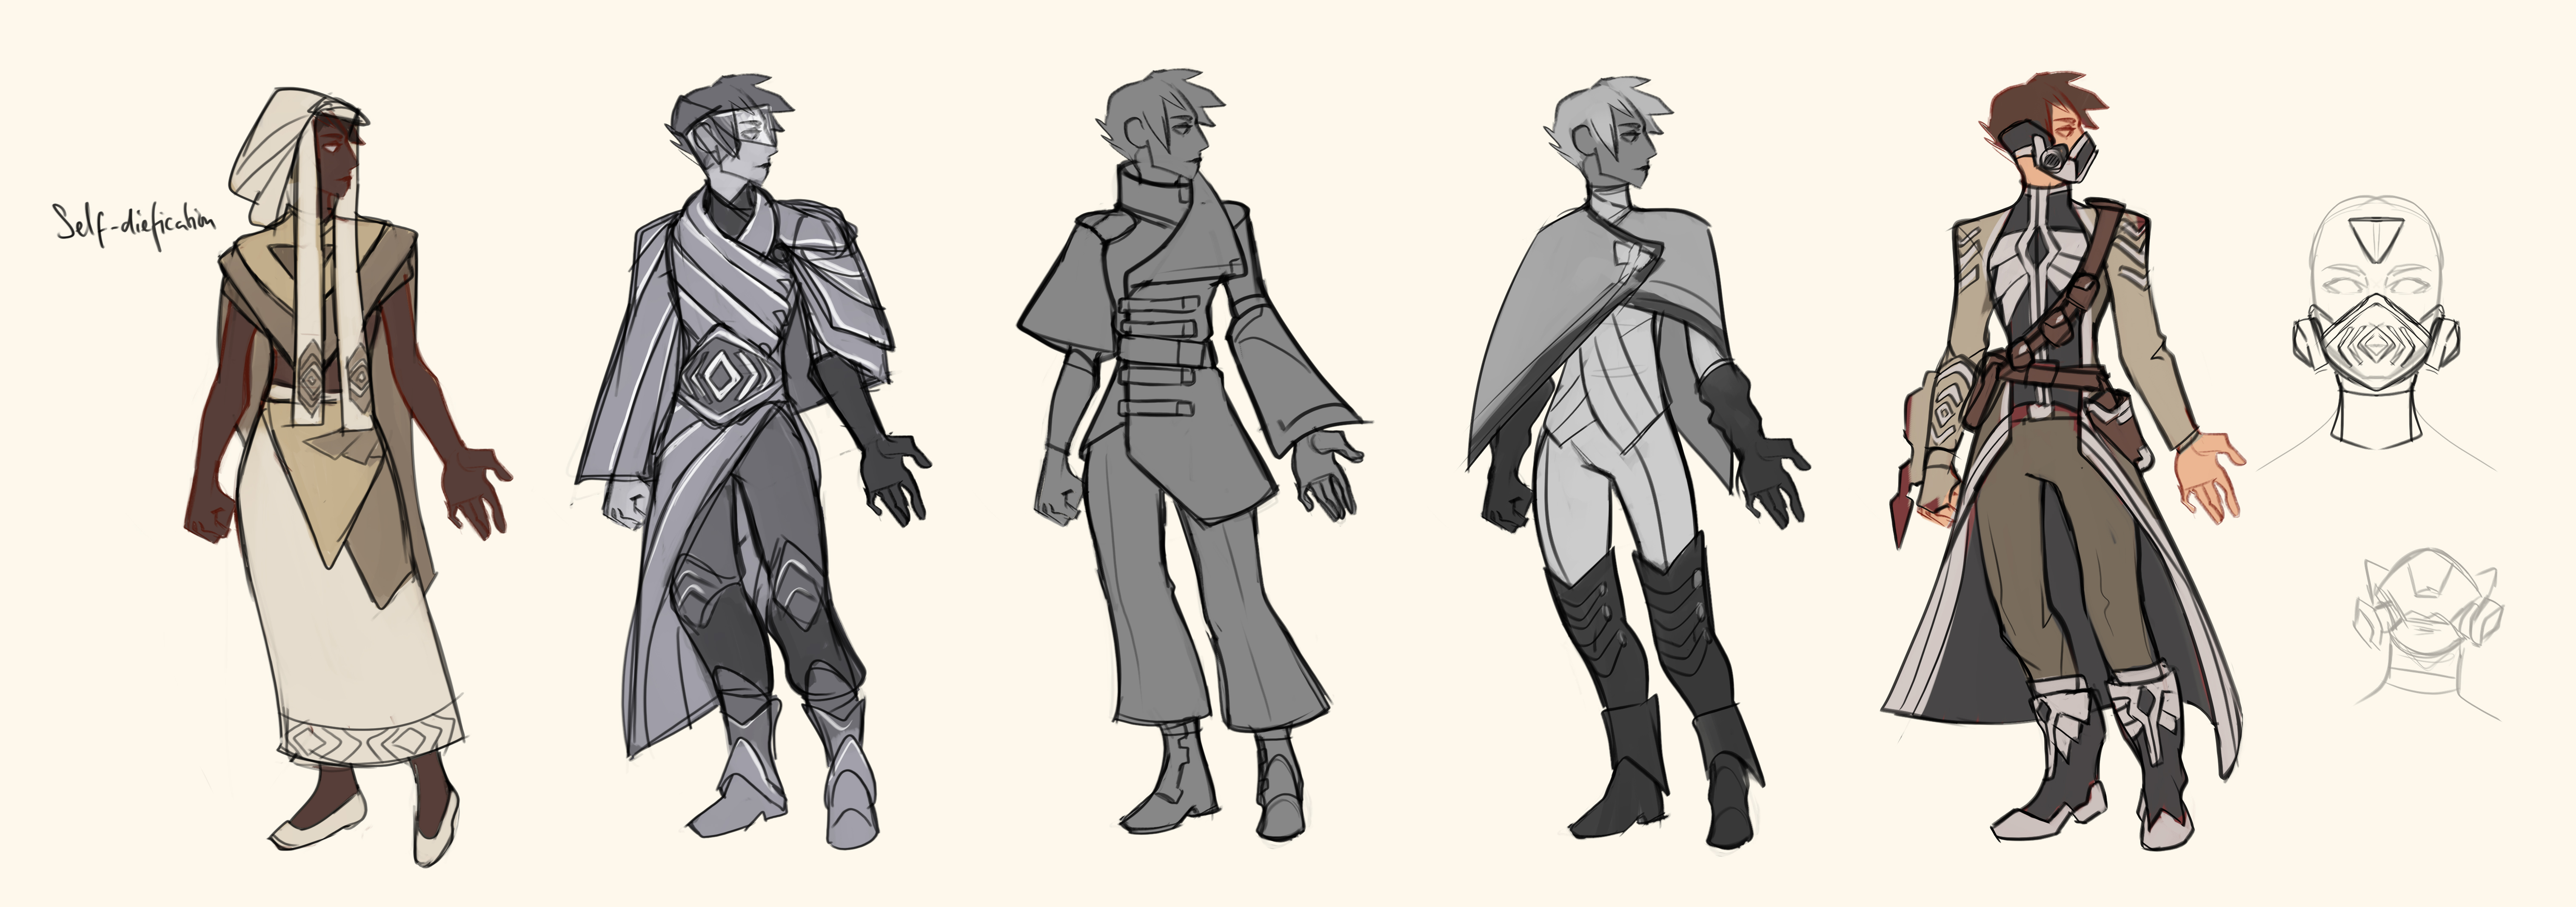 A mix of military outfits and more everyday ones, started to think of the climate of Sabor as well.